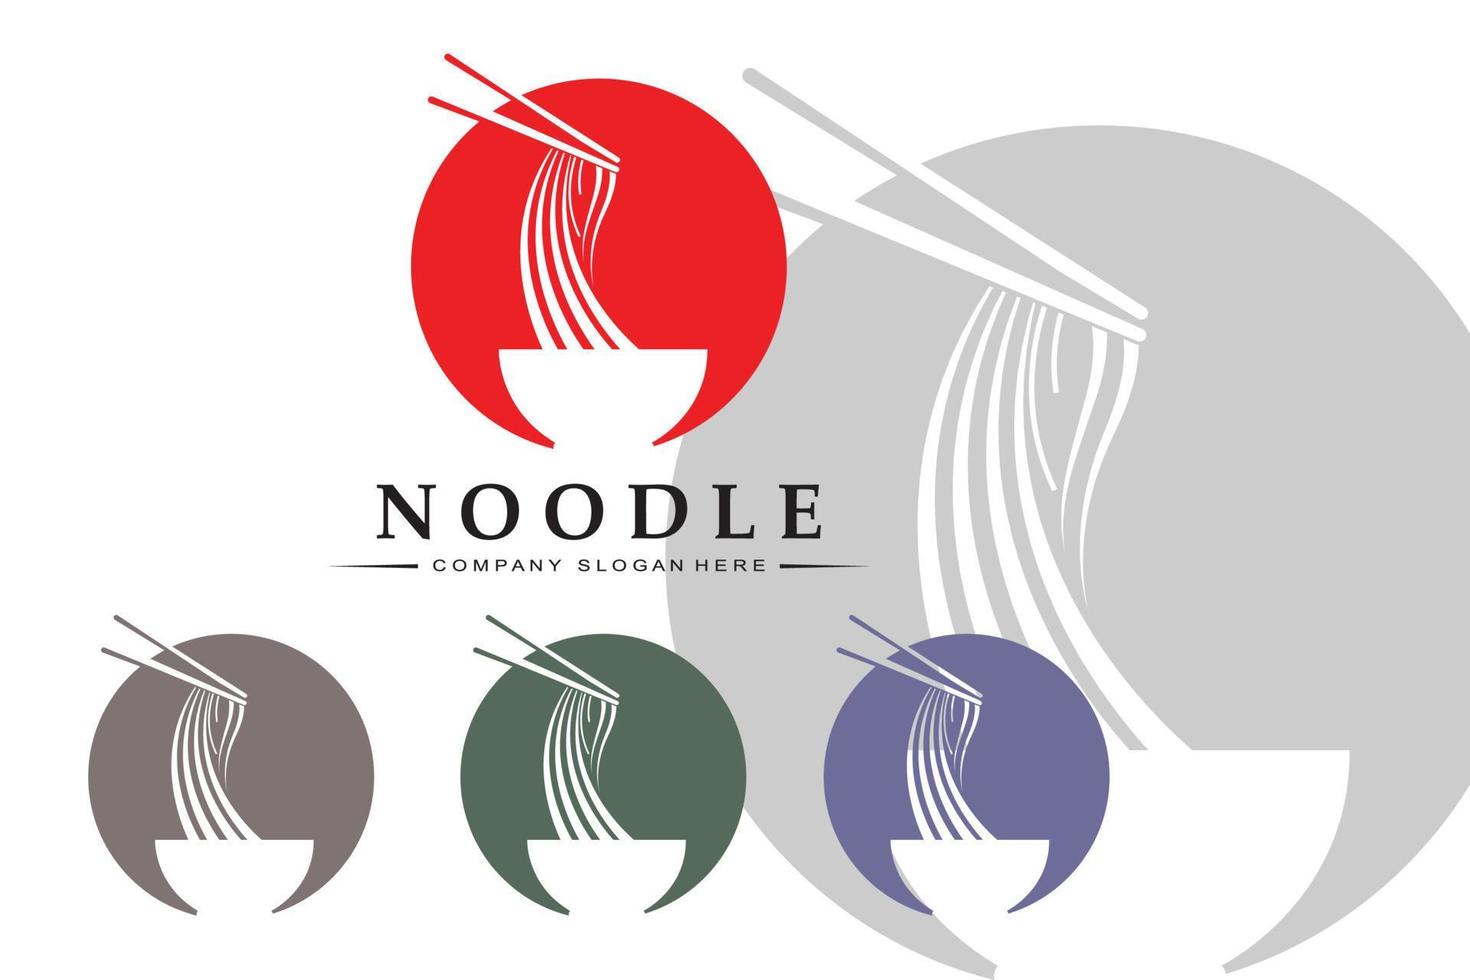 A collection of noodle logo inspiration. Chinese food and bowl design template. Retro Concept Illustration vector